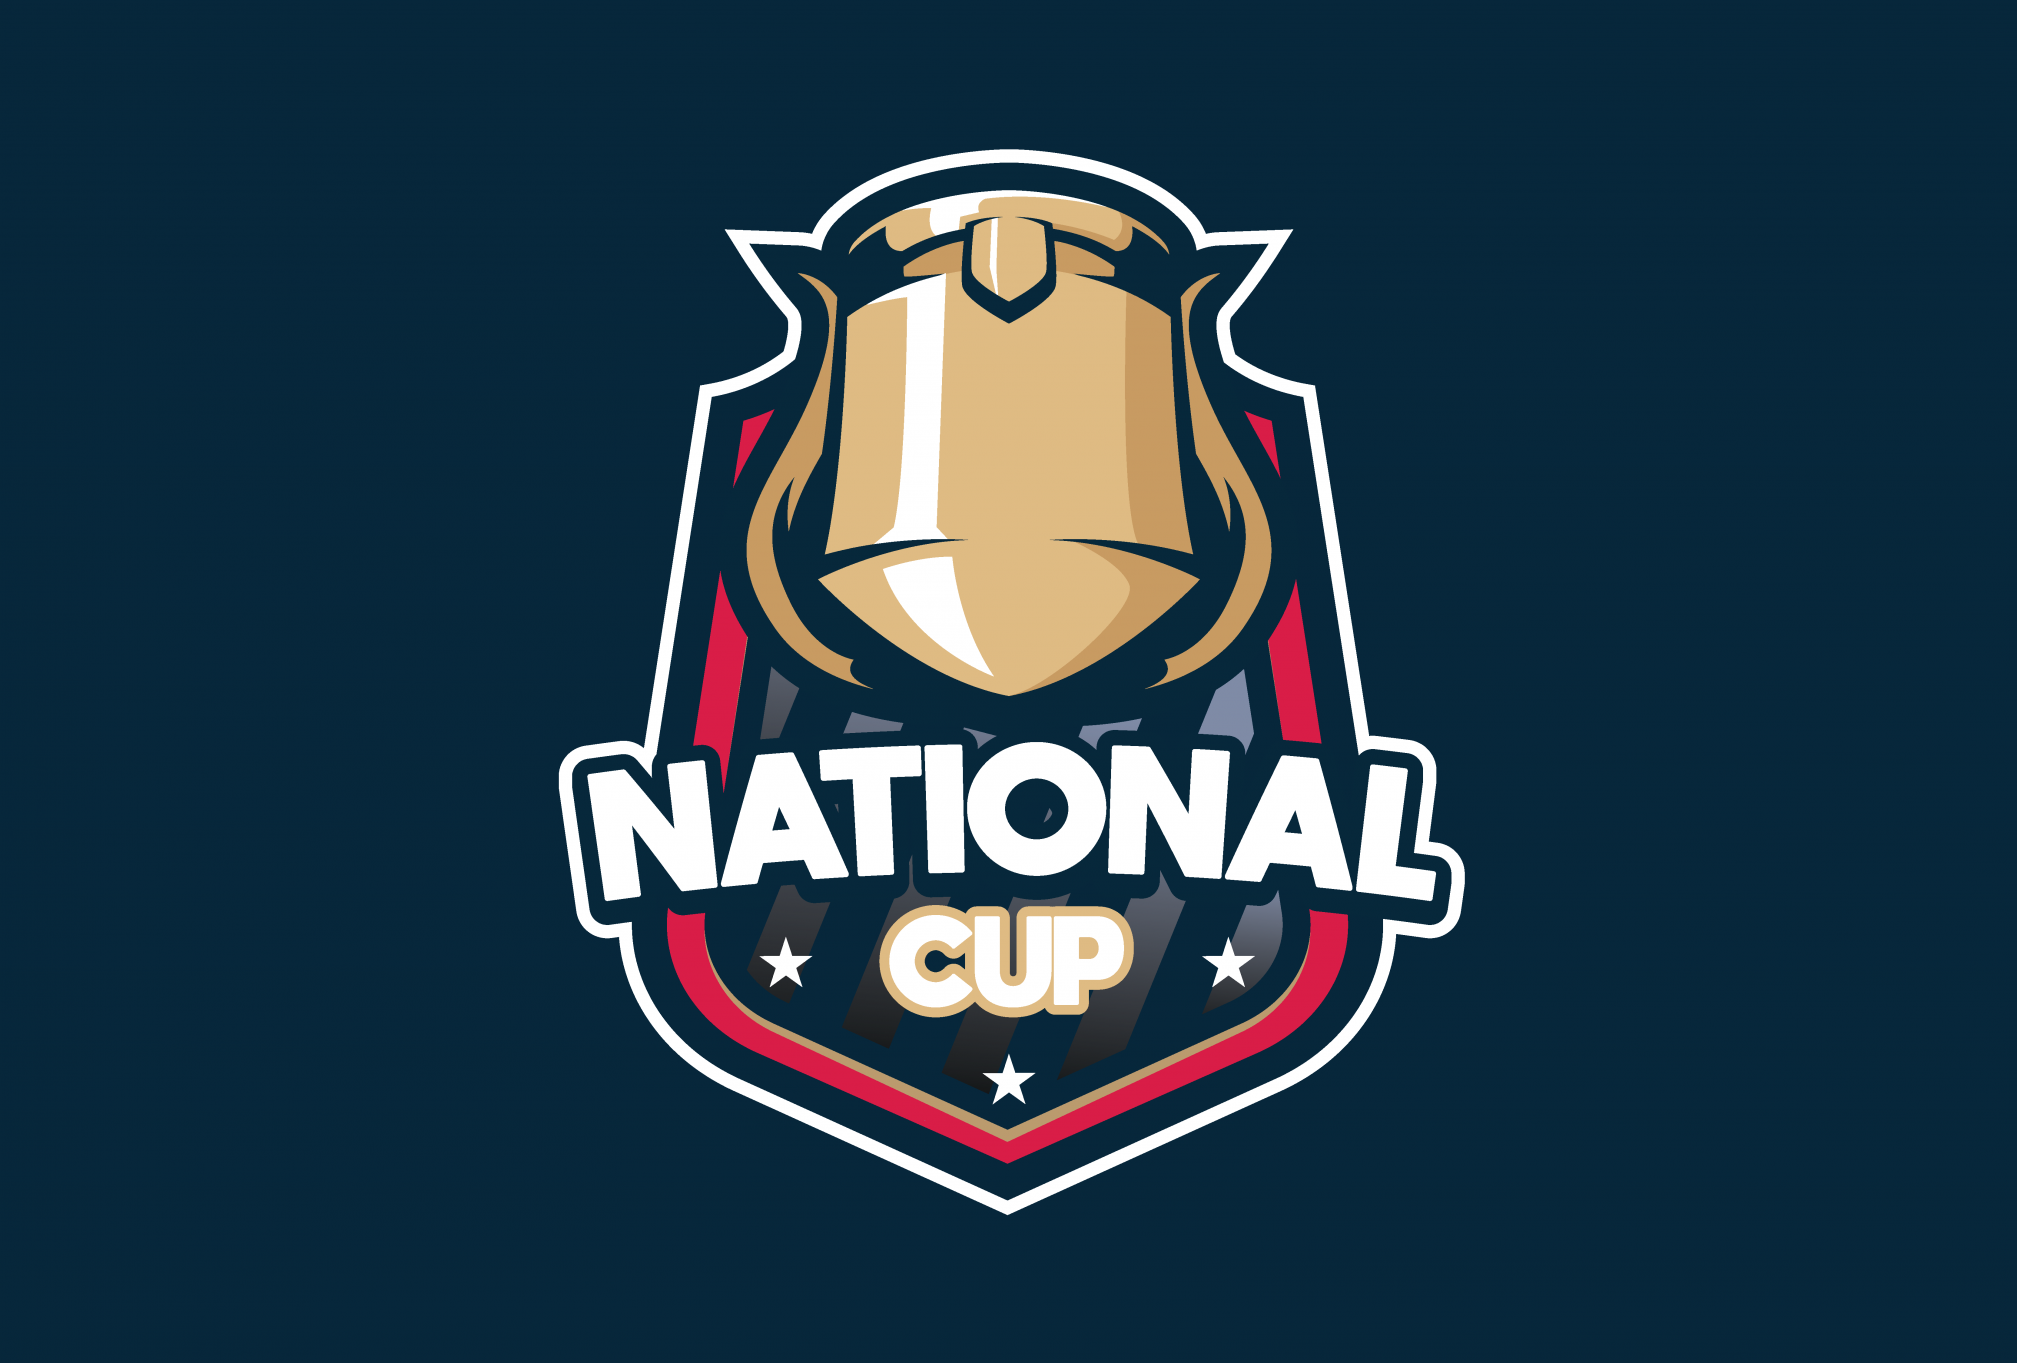 NATIONAL CUP 2020